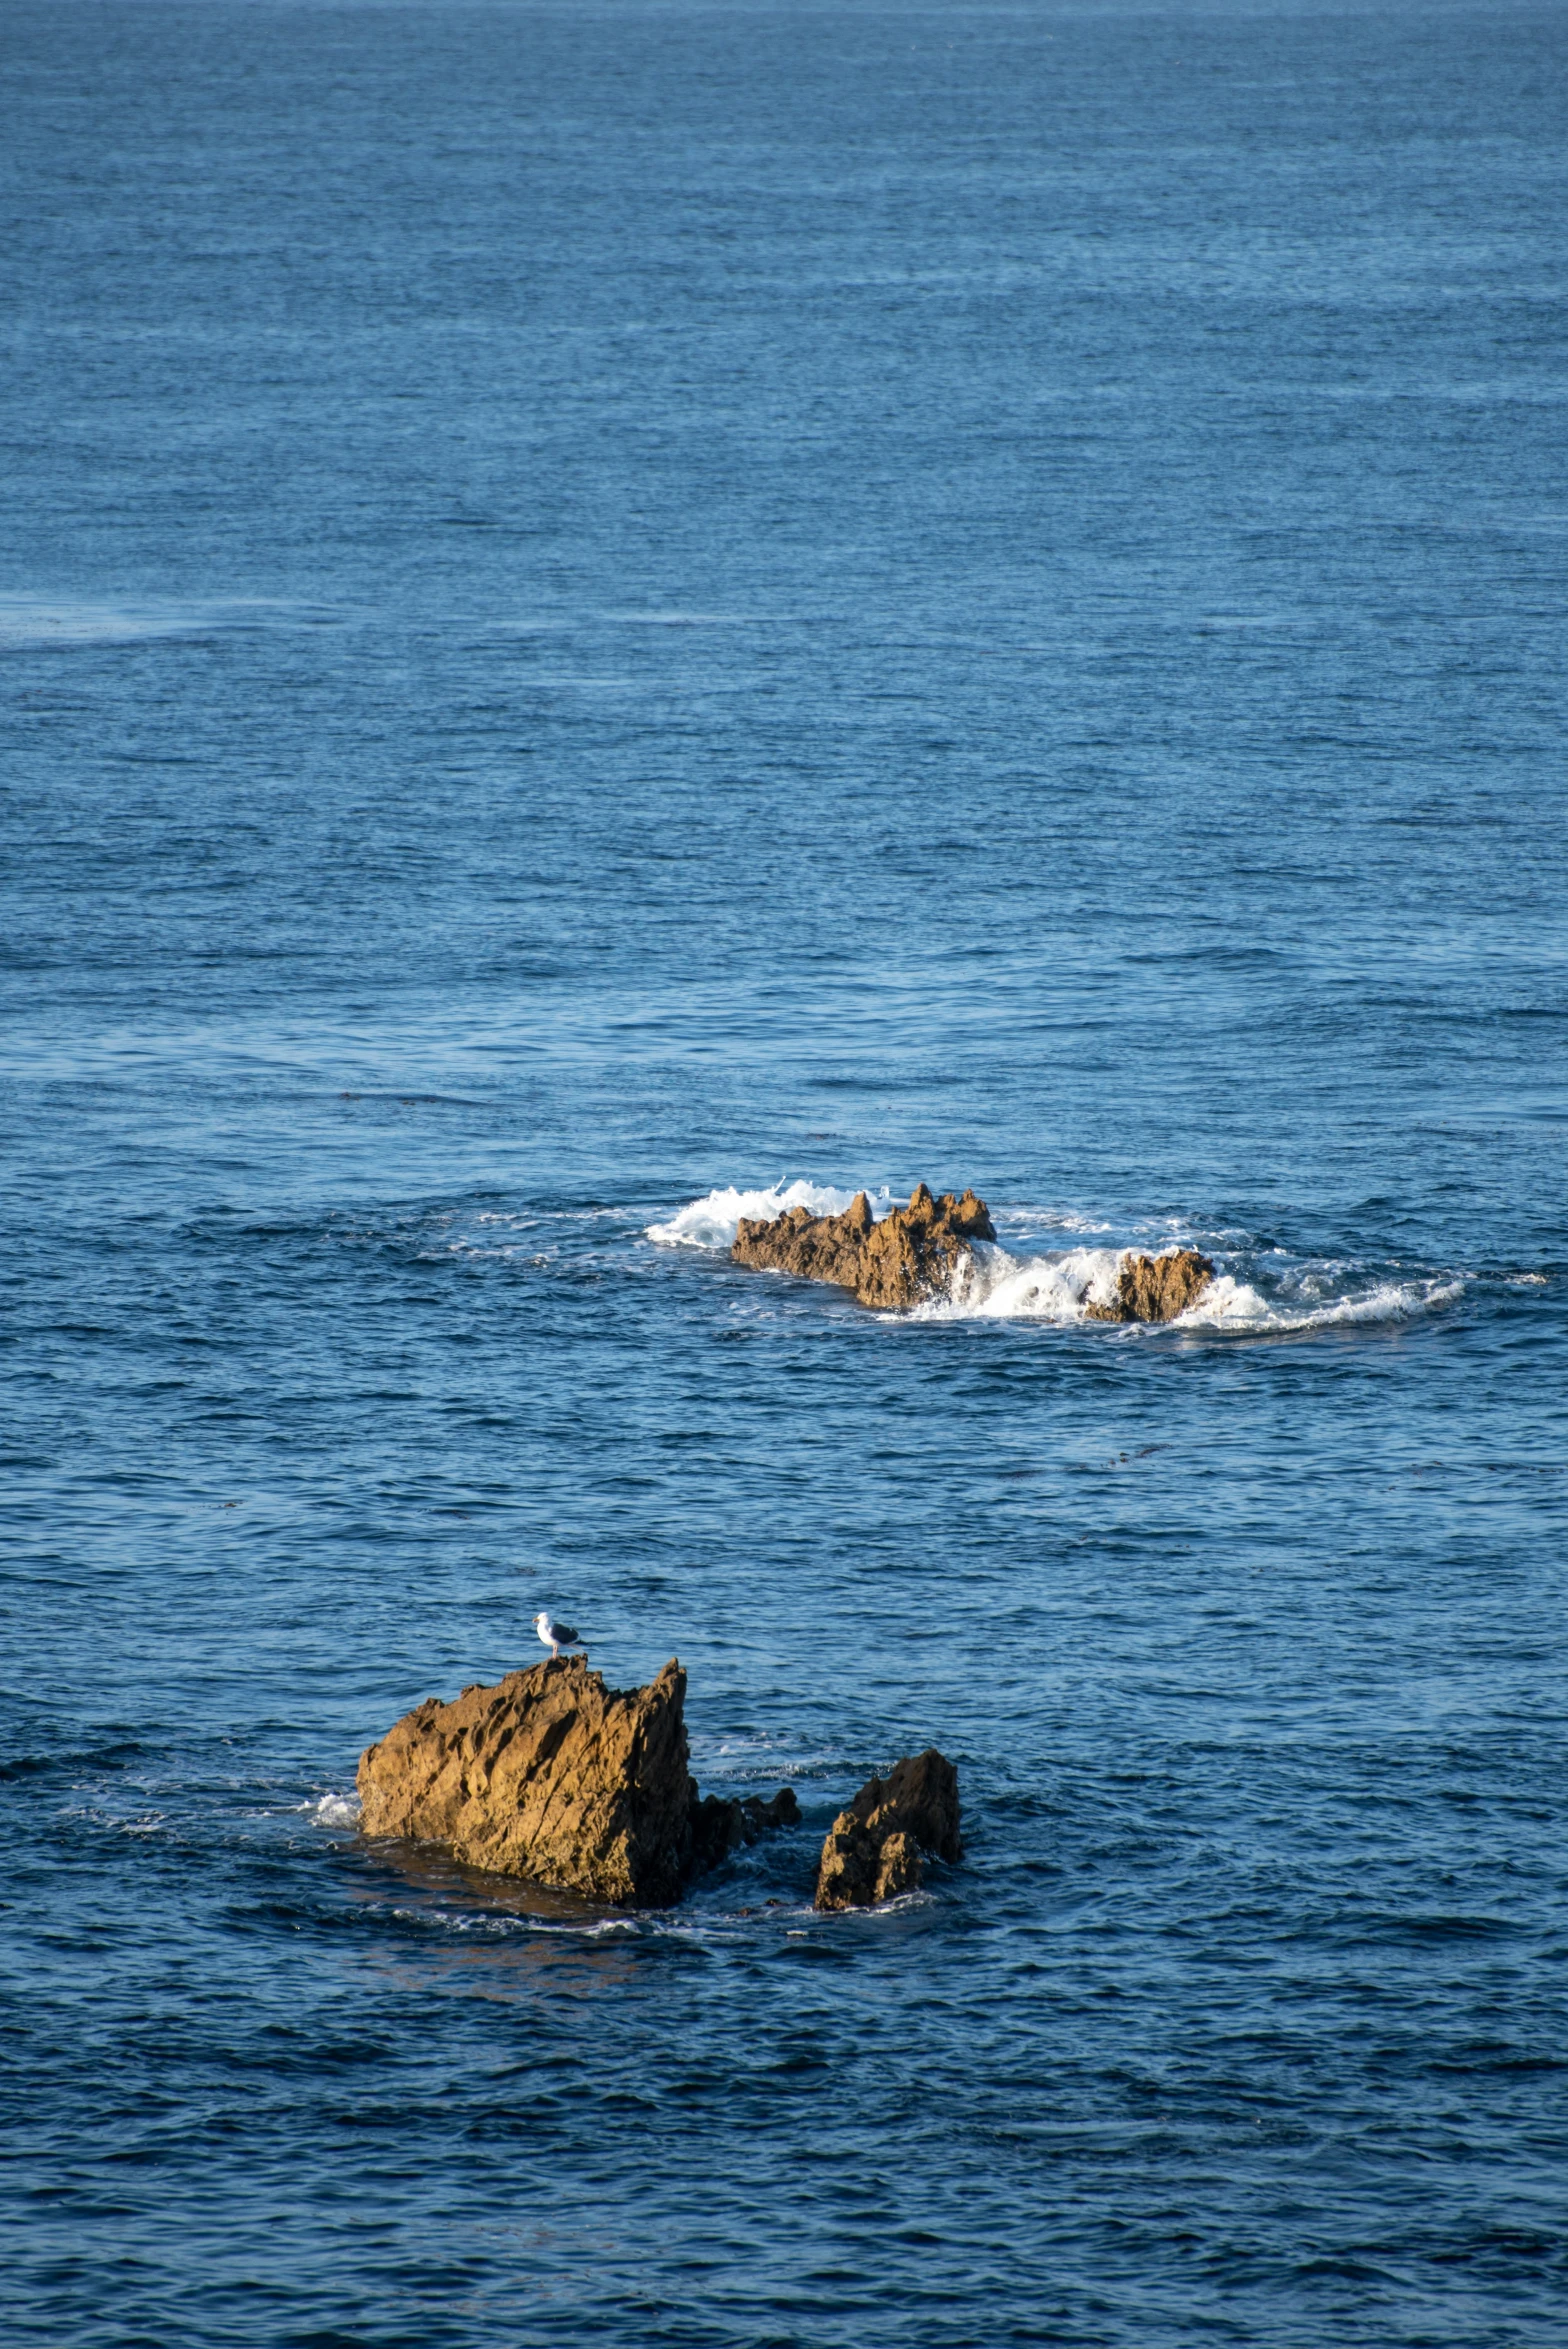 two seagulls are sitting on rocks by the ocean